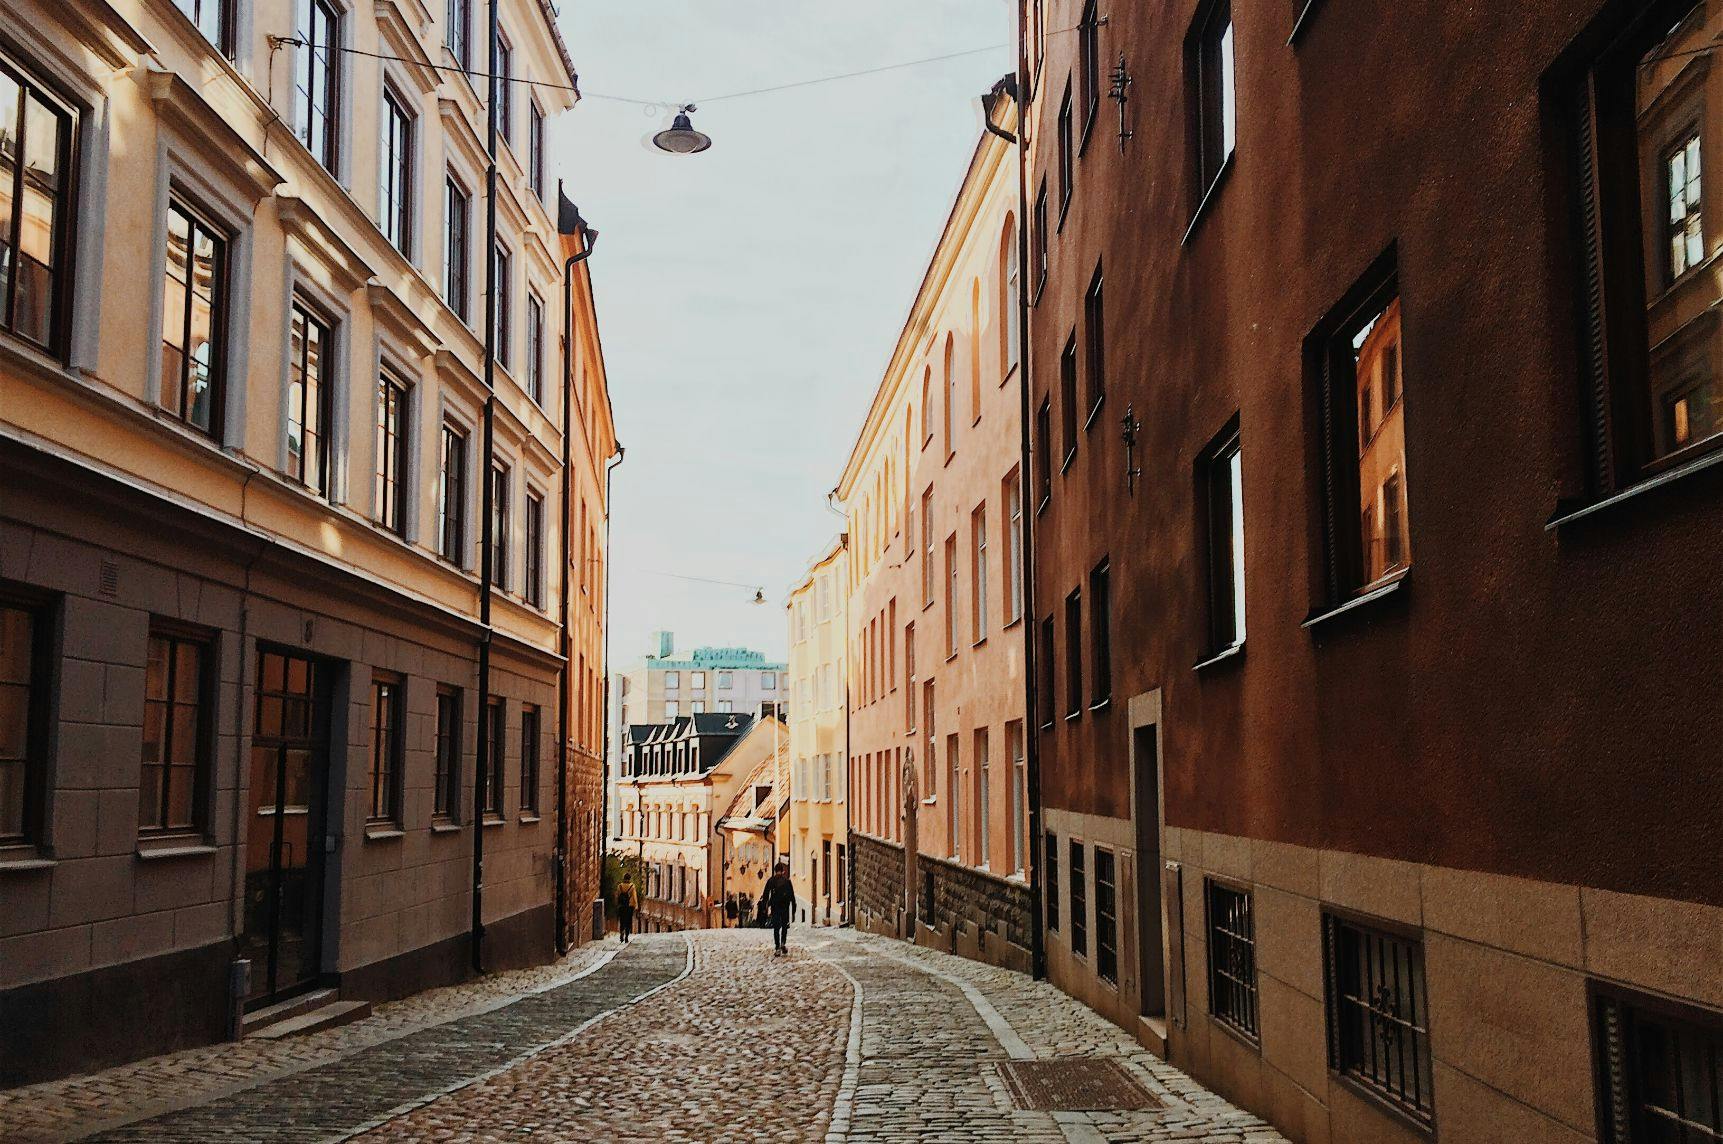 Explore Stockholm in 1 hour with a Local